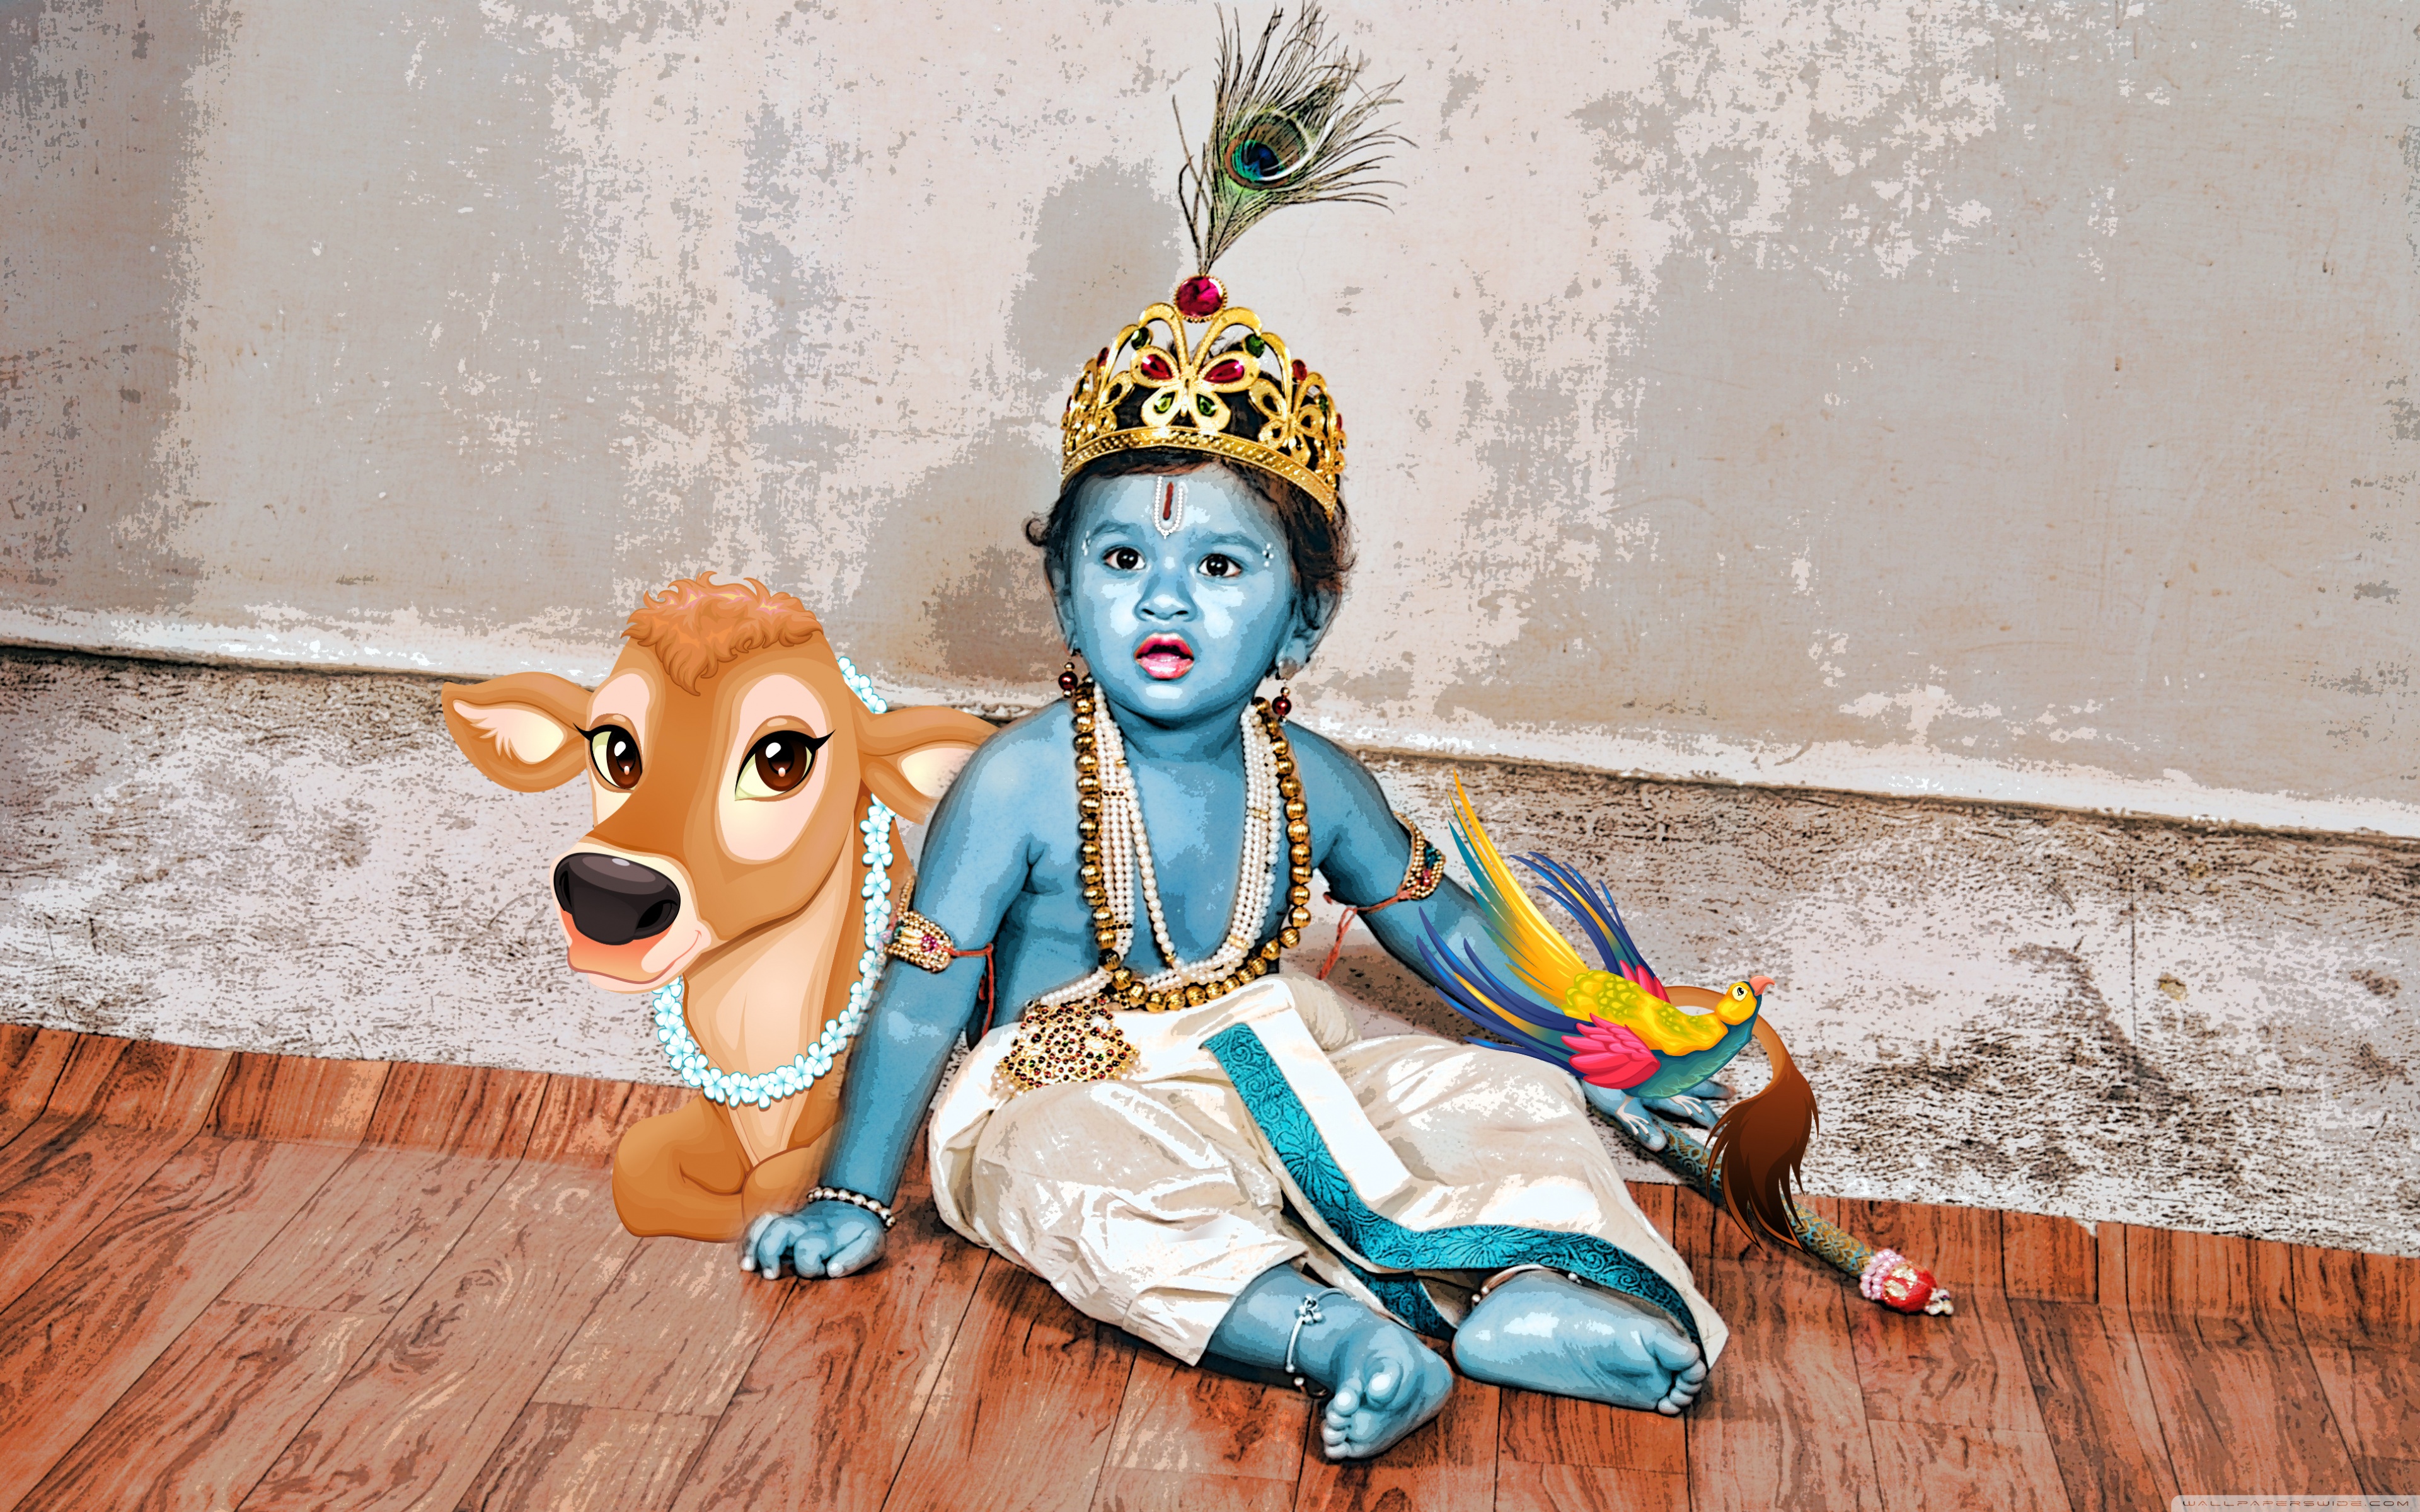 Lord Krishna Stock Photos, Images and Backgrounds for Free Download